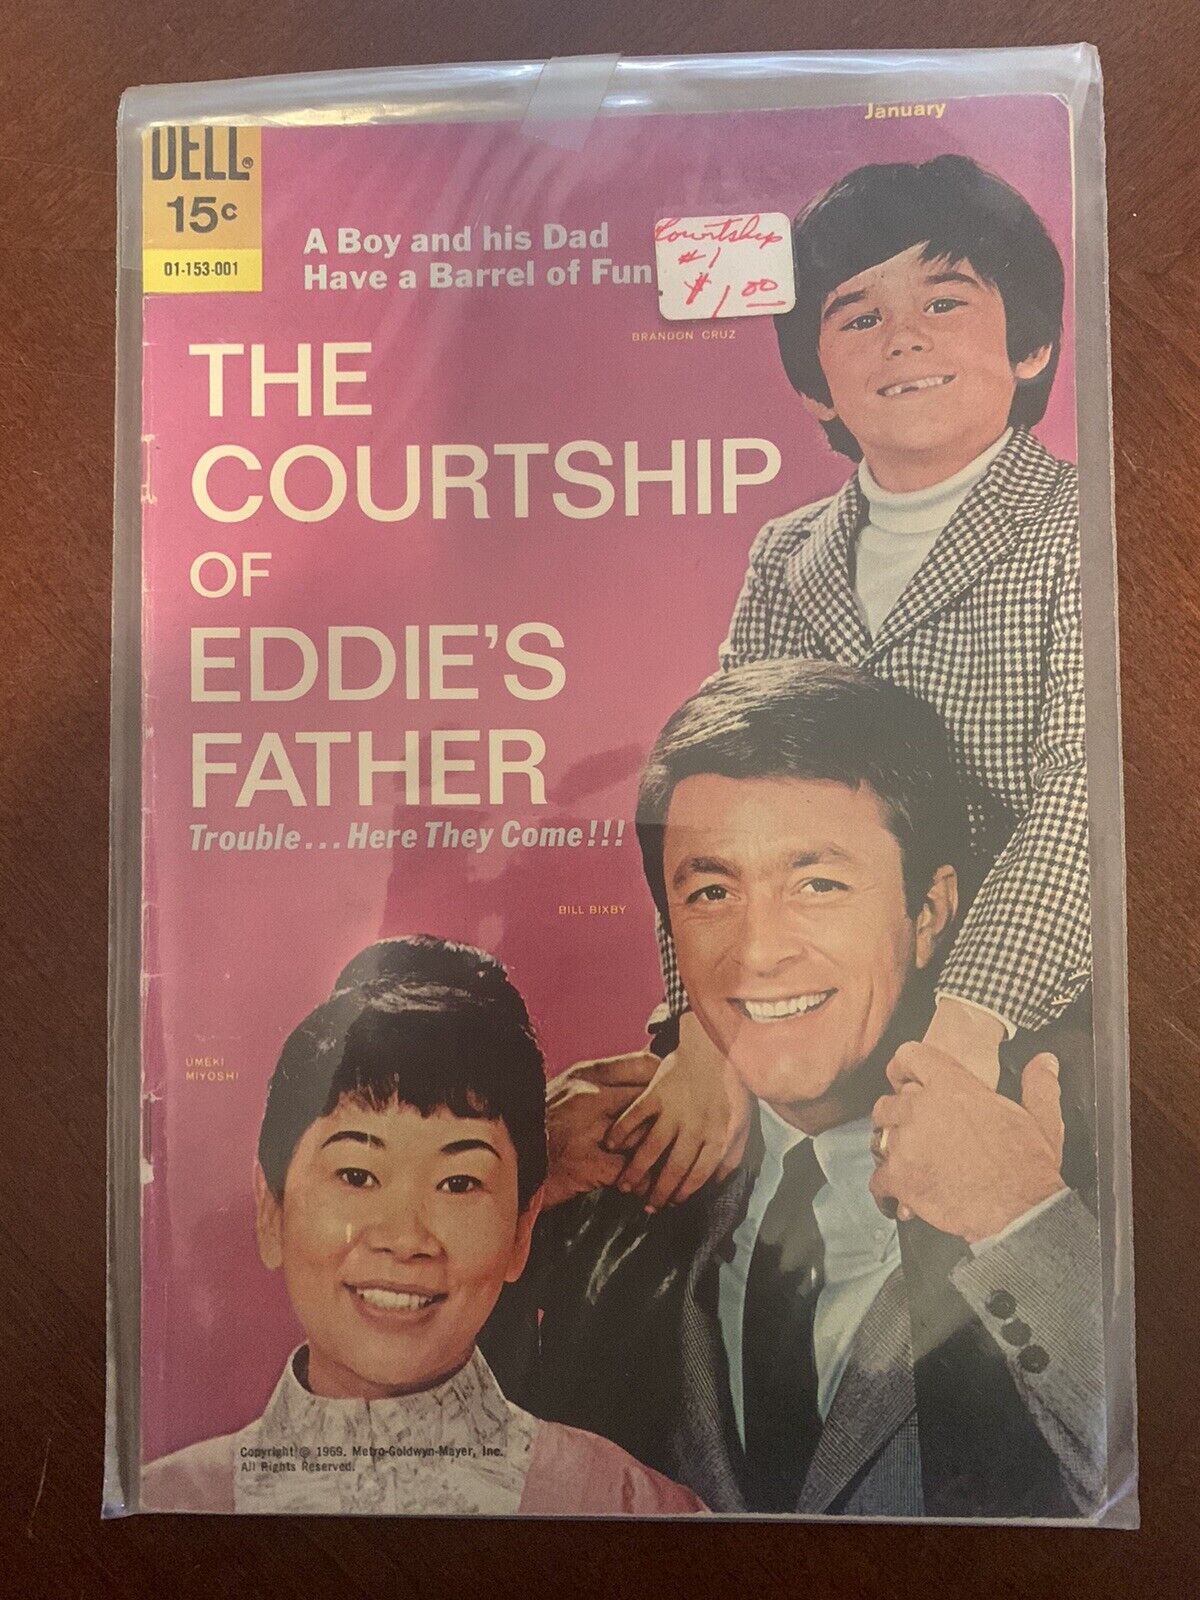 COURTSHIP OF EDDIES FATHER #1 DELL COMICS JANUARY 1970